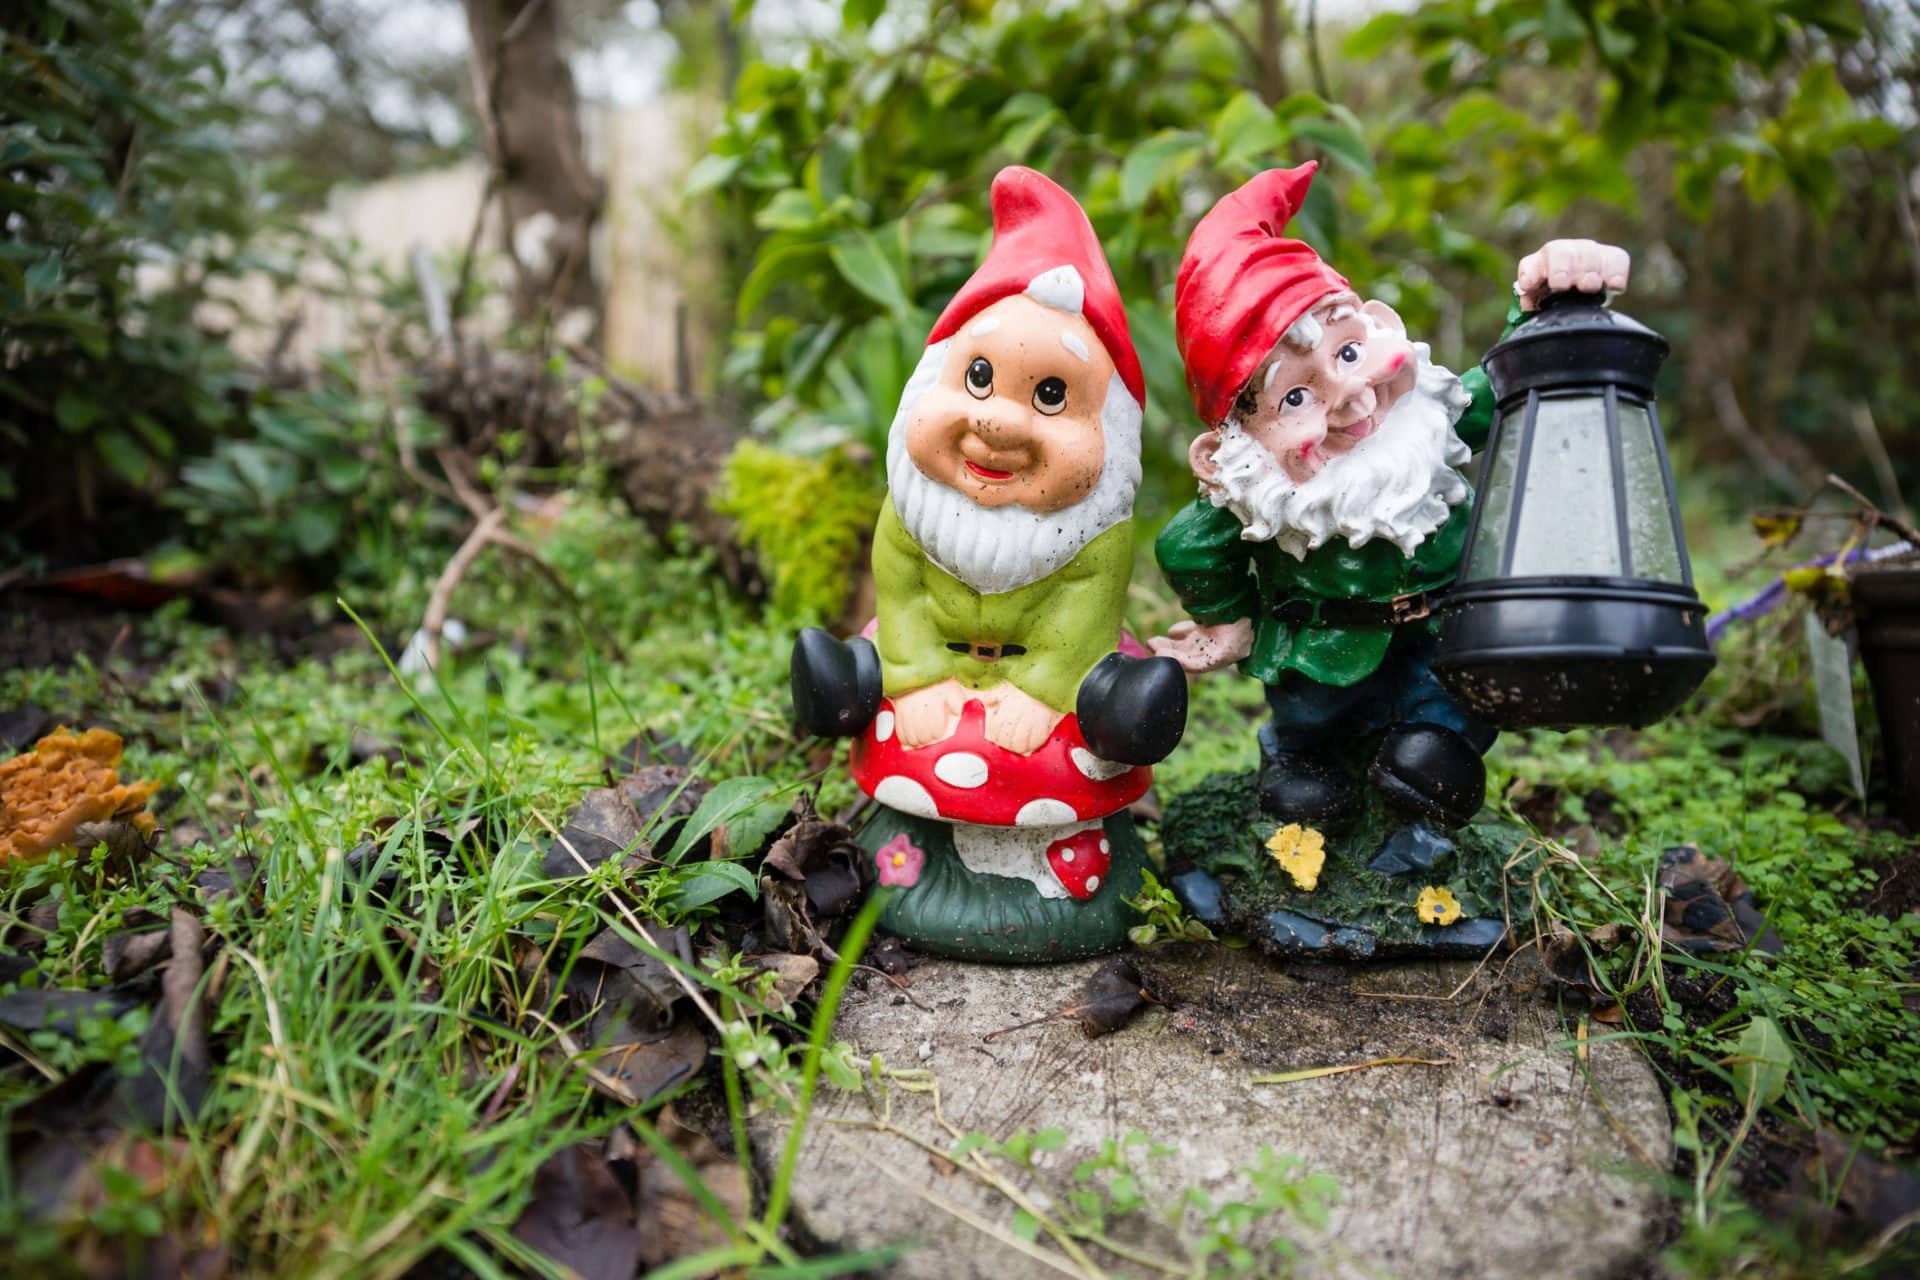 Racy meaning of gnome on front porch will make you think twice 1